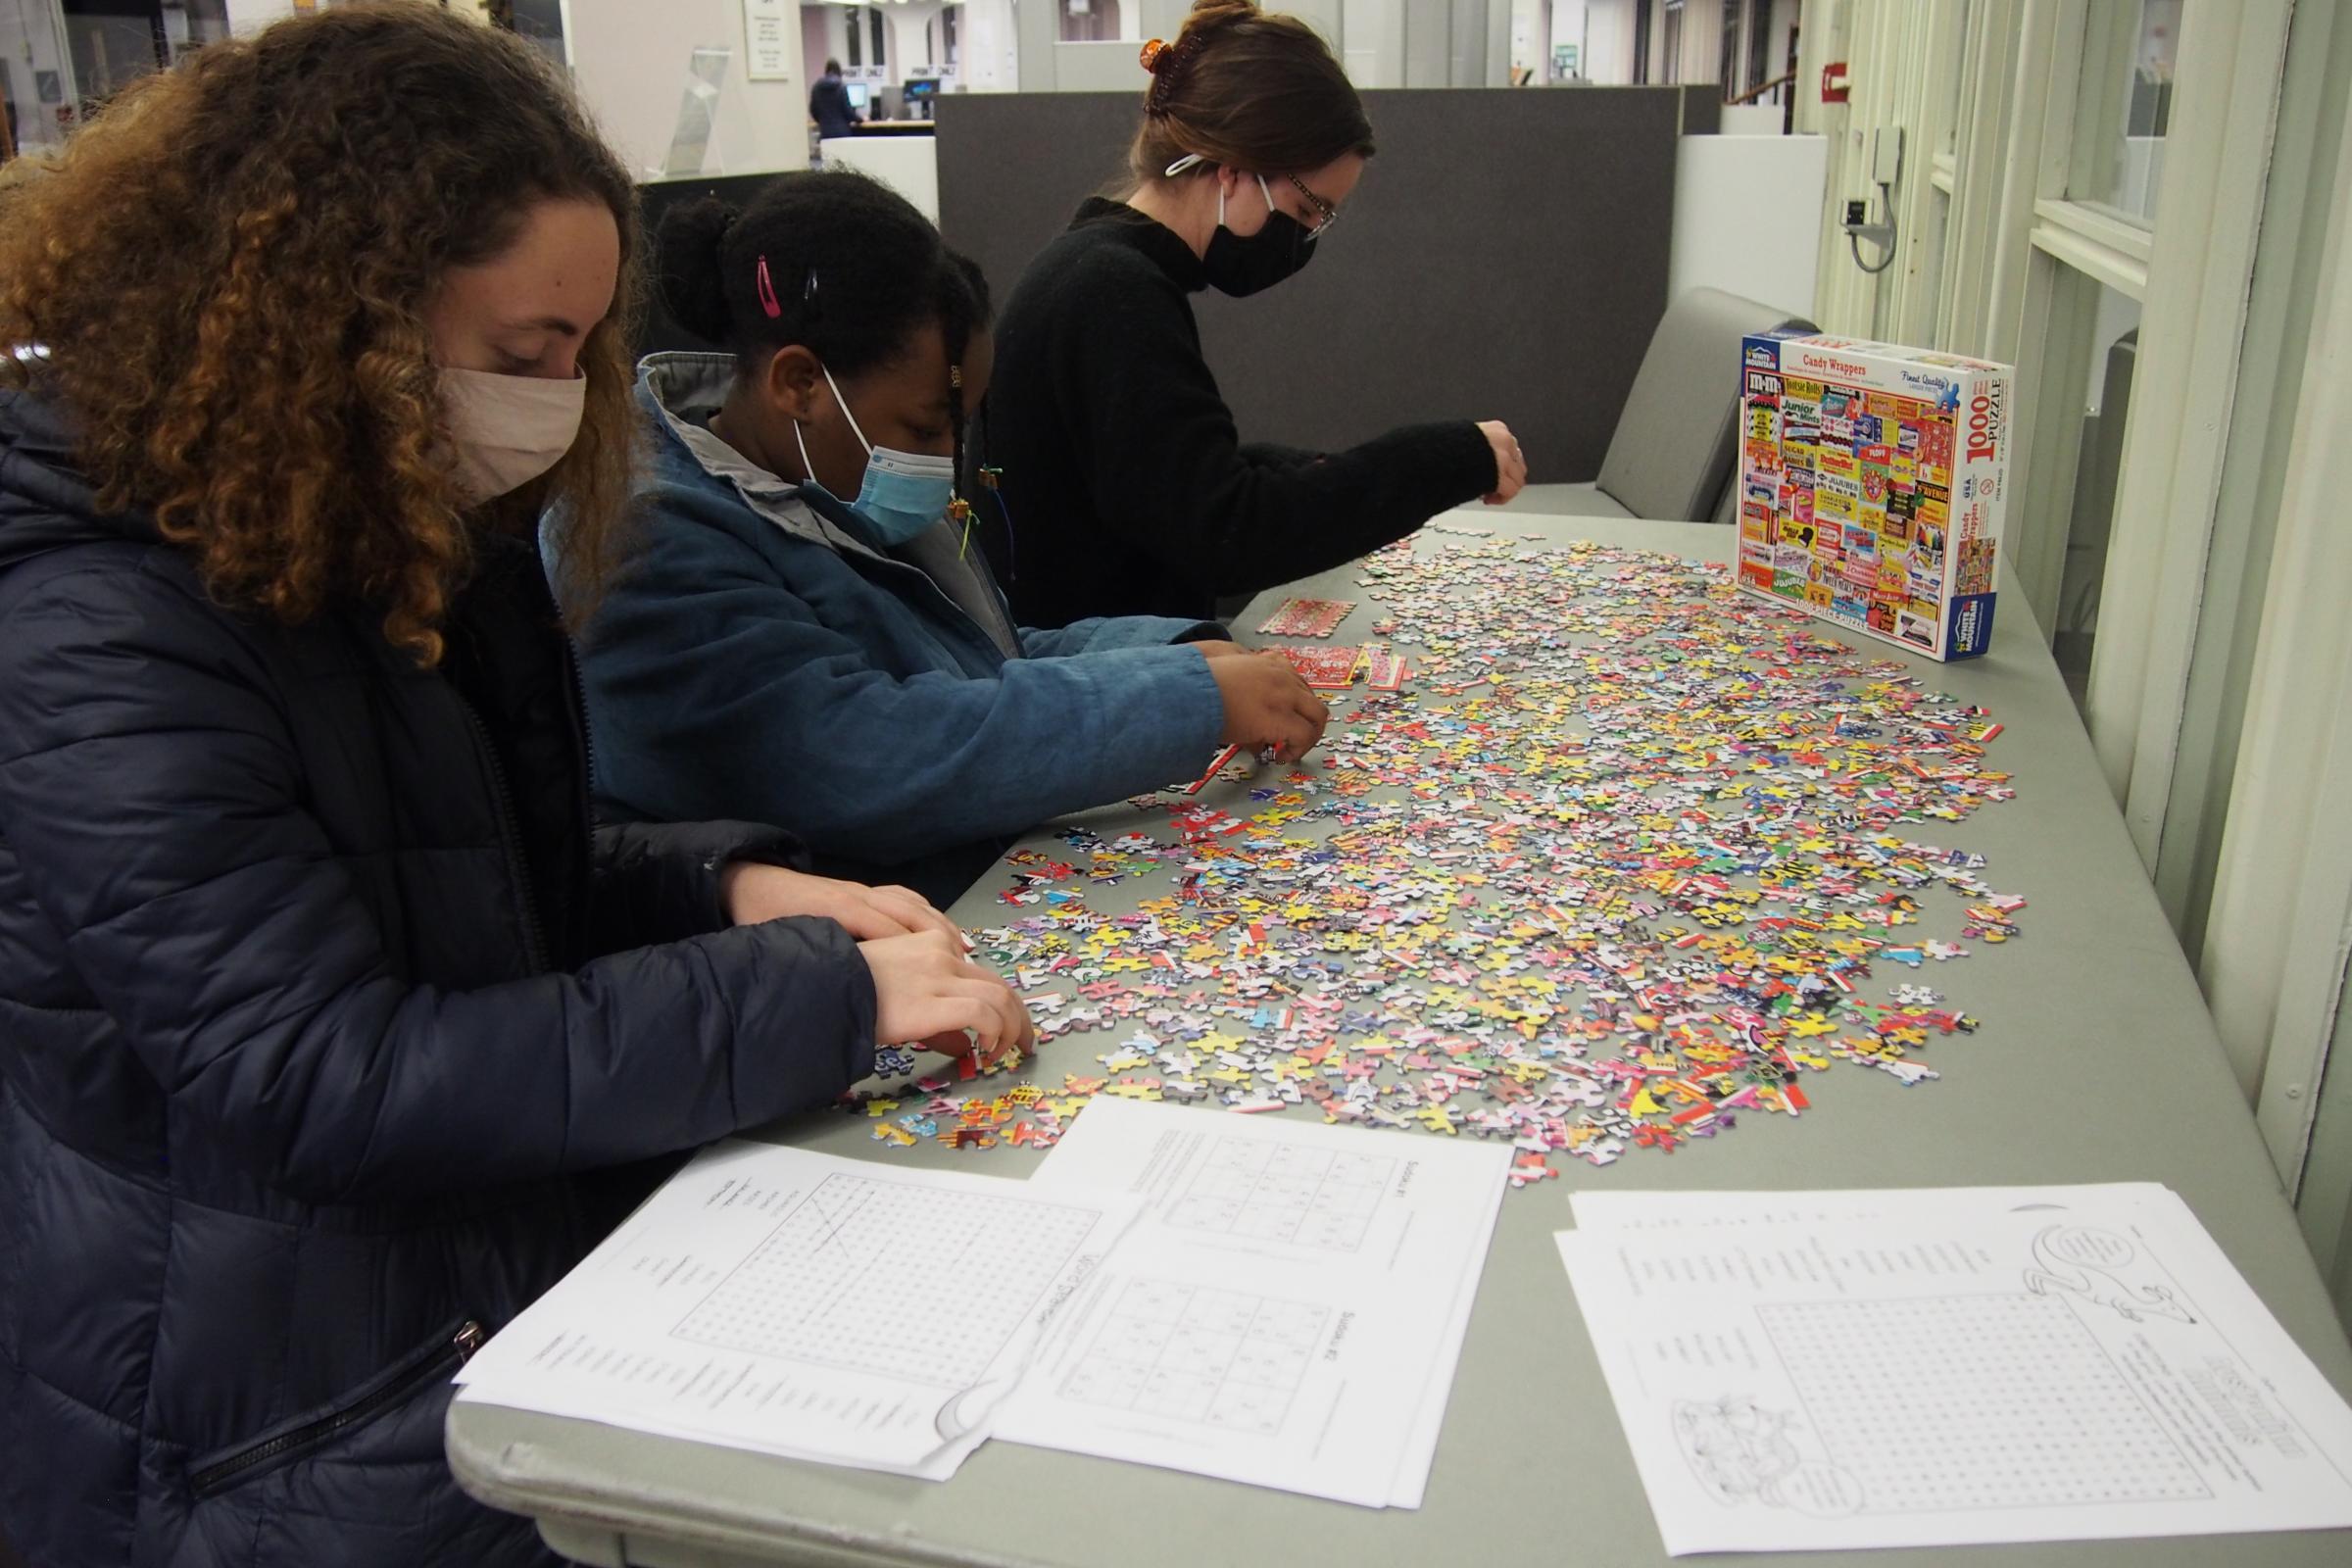 Students work at the Puzzle Corner